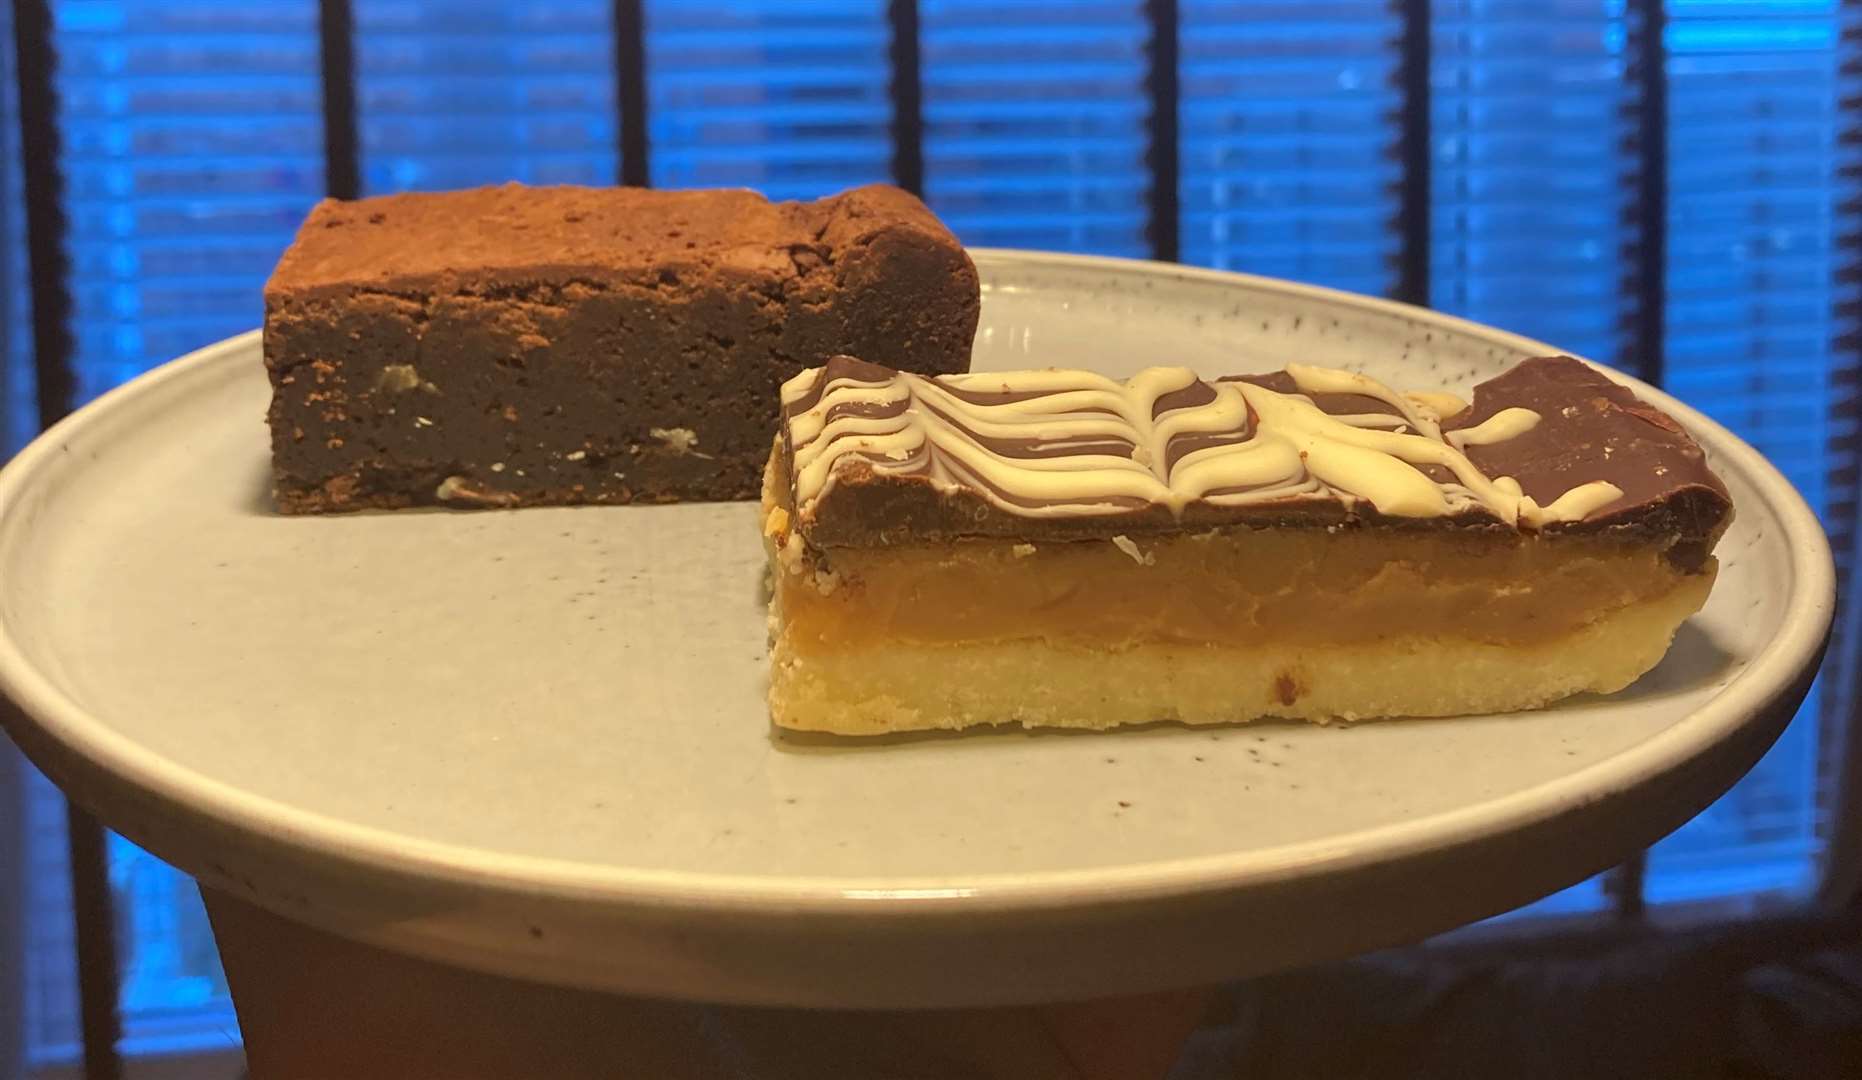 The chocolate brownie and millionaire's shortbread. Picture: Kev Hurst